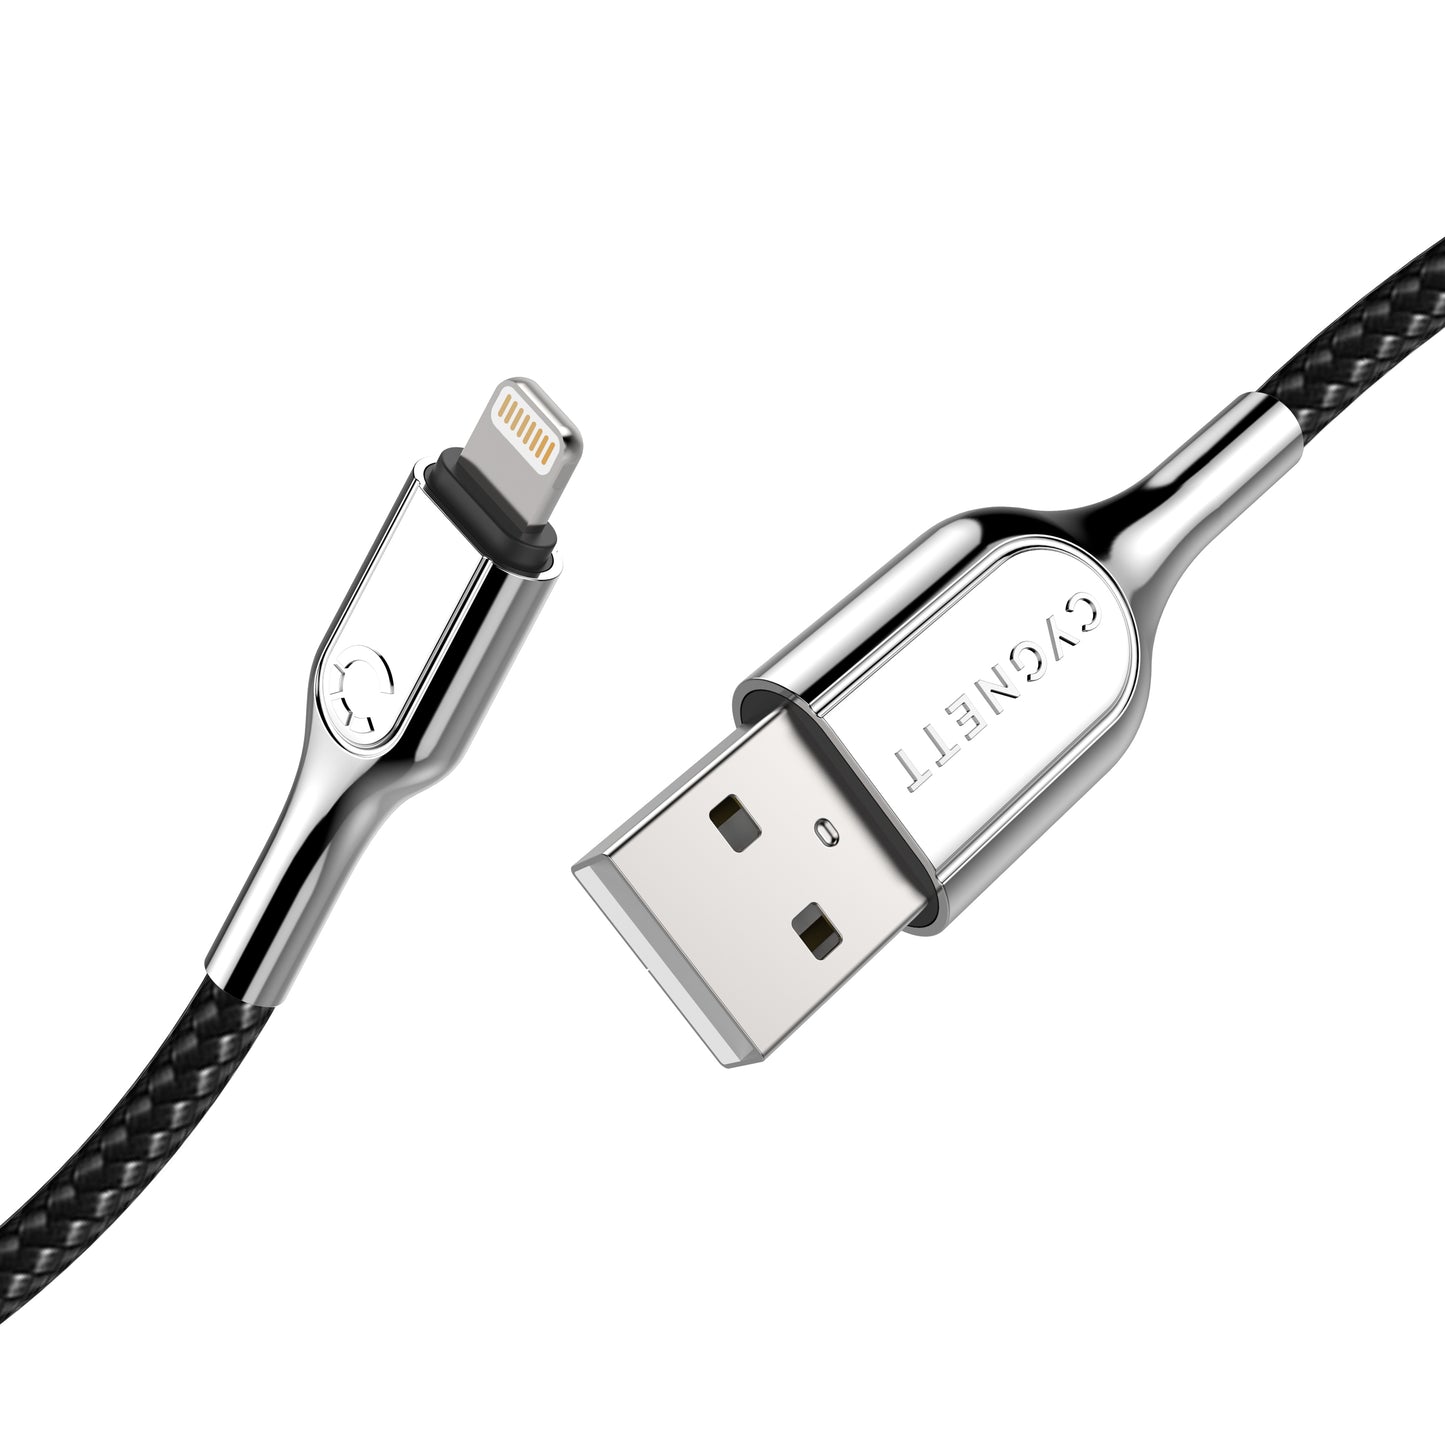 Cygnett Armoured Lightning to USB-A Cable 3M (Black)